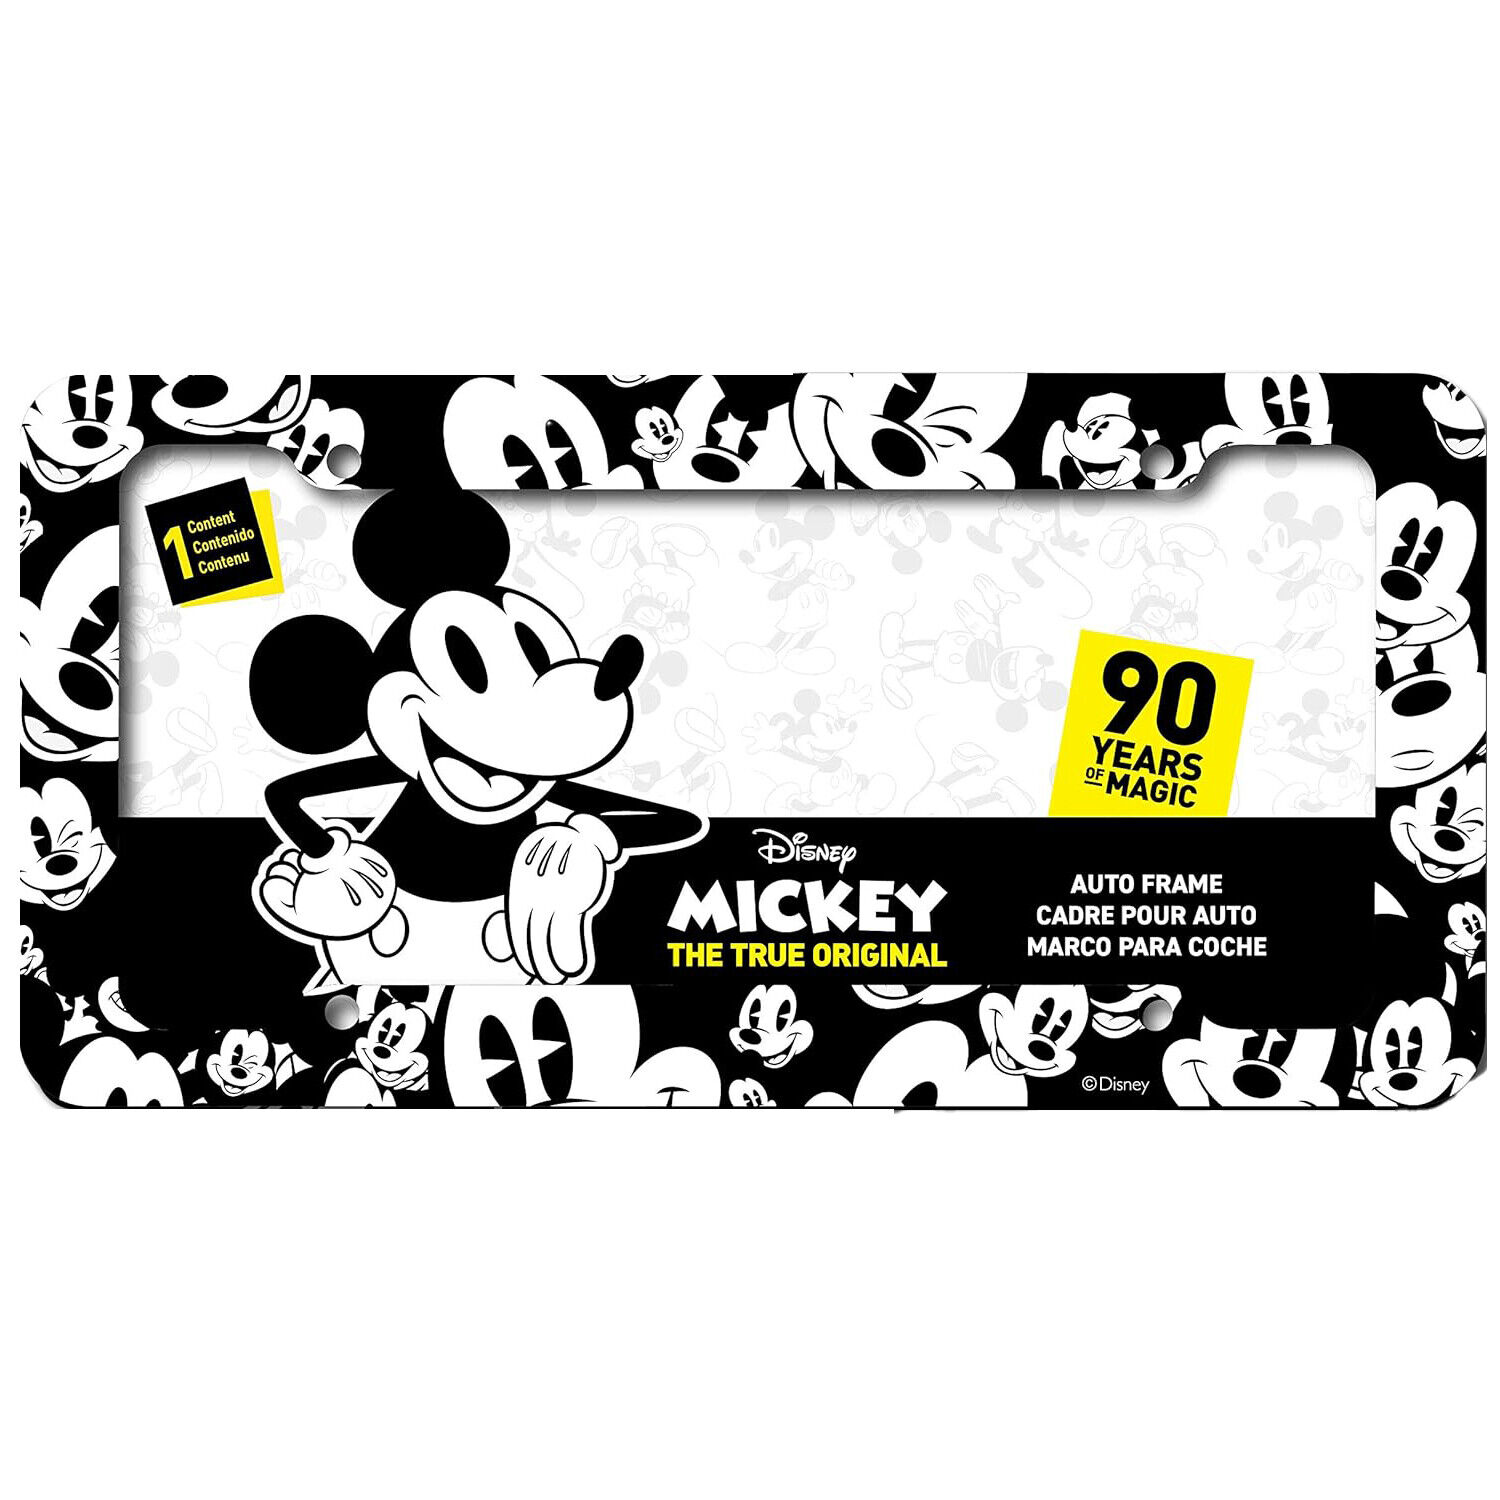 Chroma Mickey Mouse Head License Plate Frames, Plastic Car License Plate